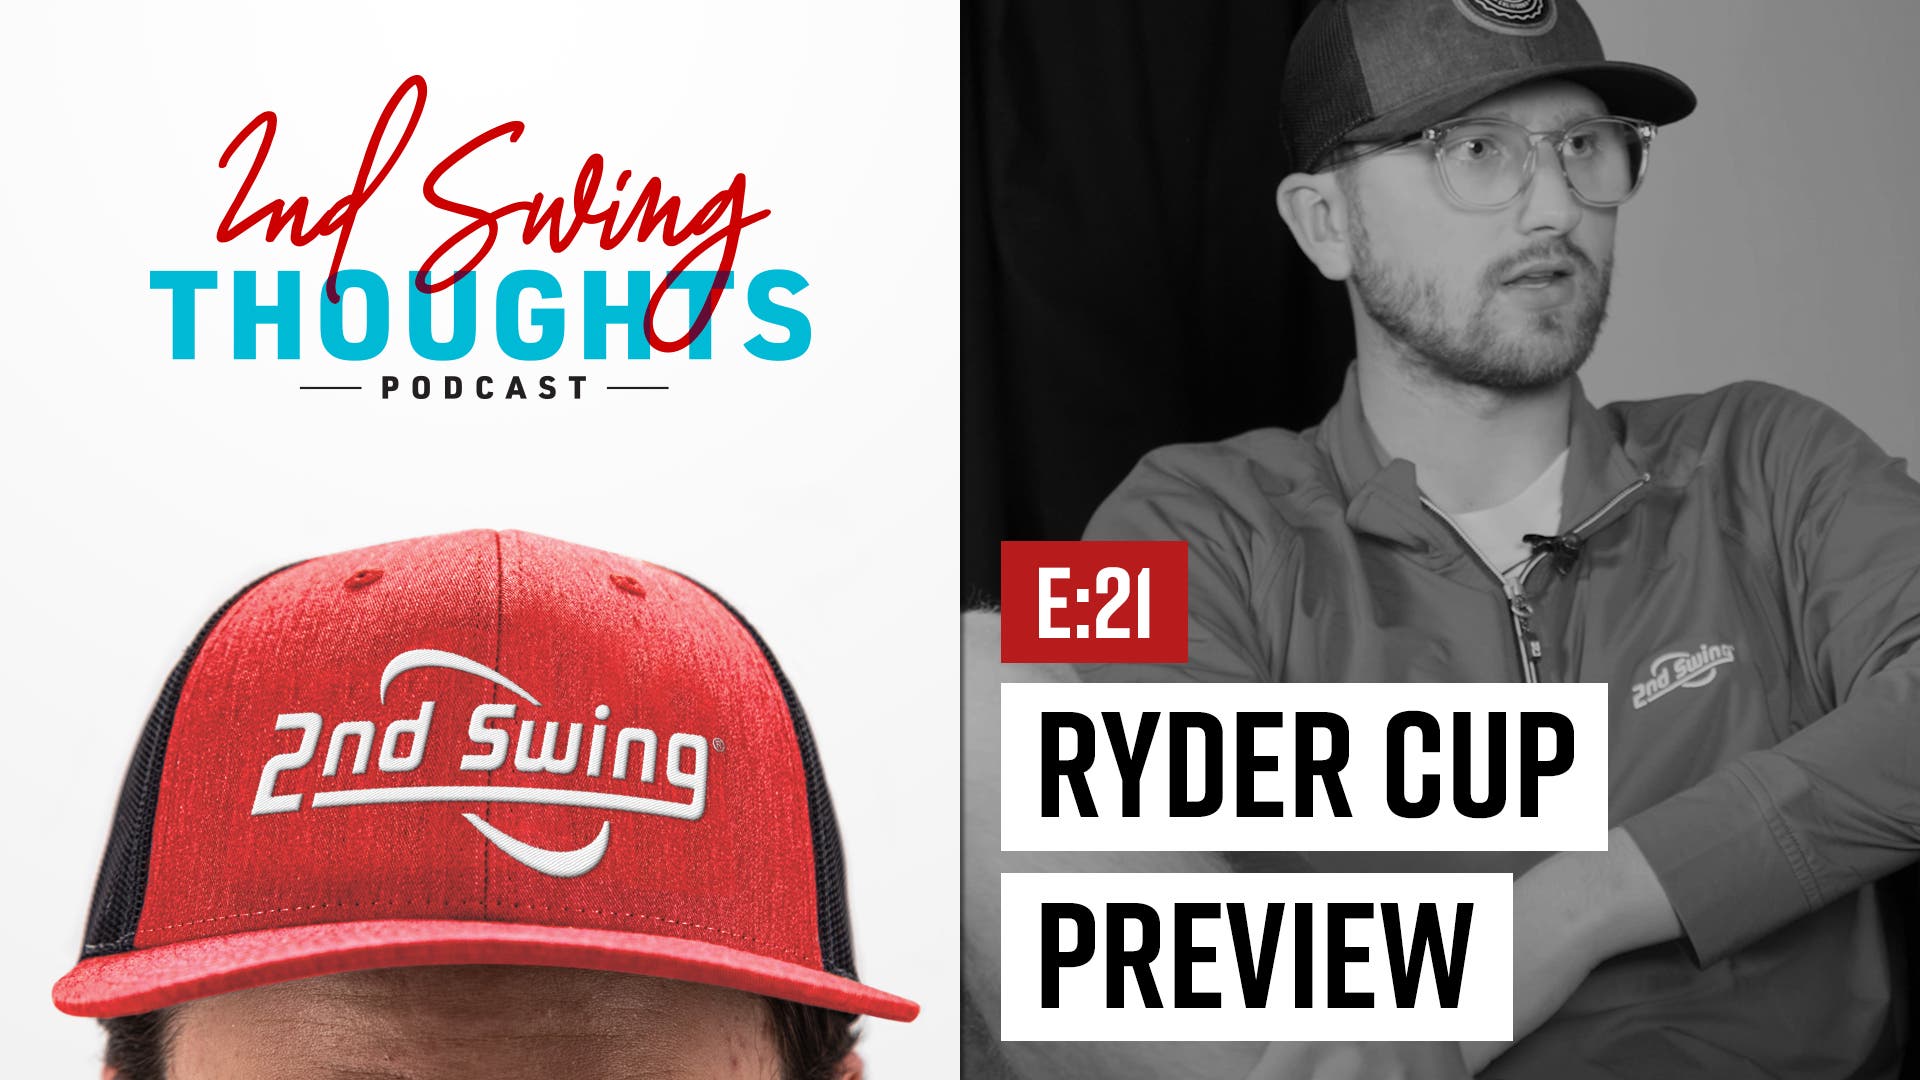 2nd Swing Thoughts | Episode 21: Ryder Cup Preview